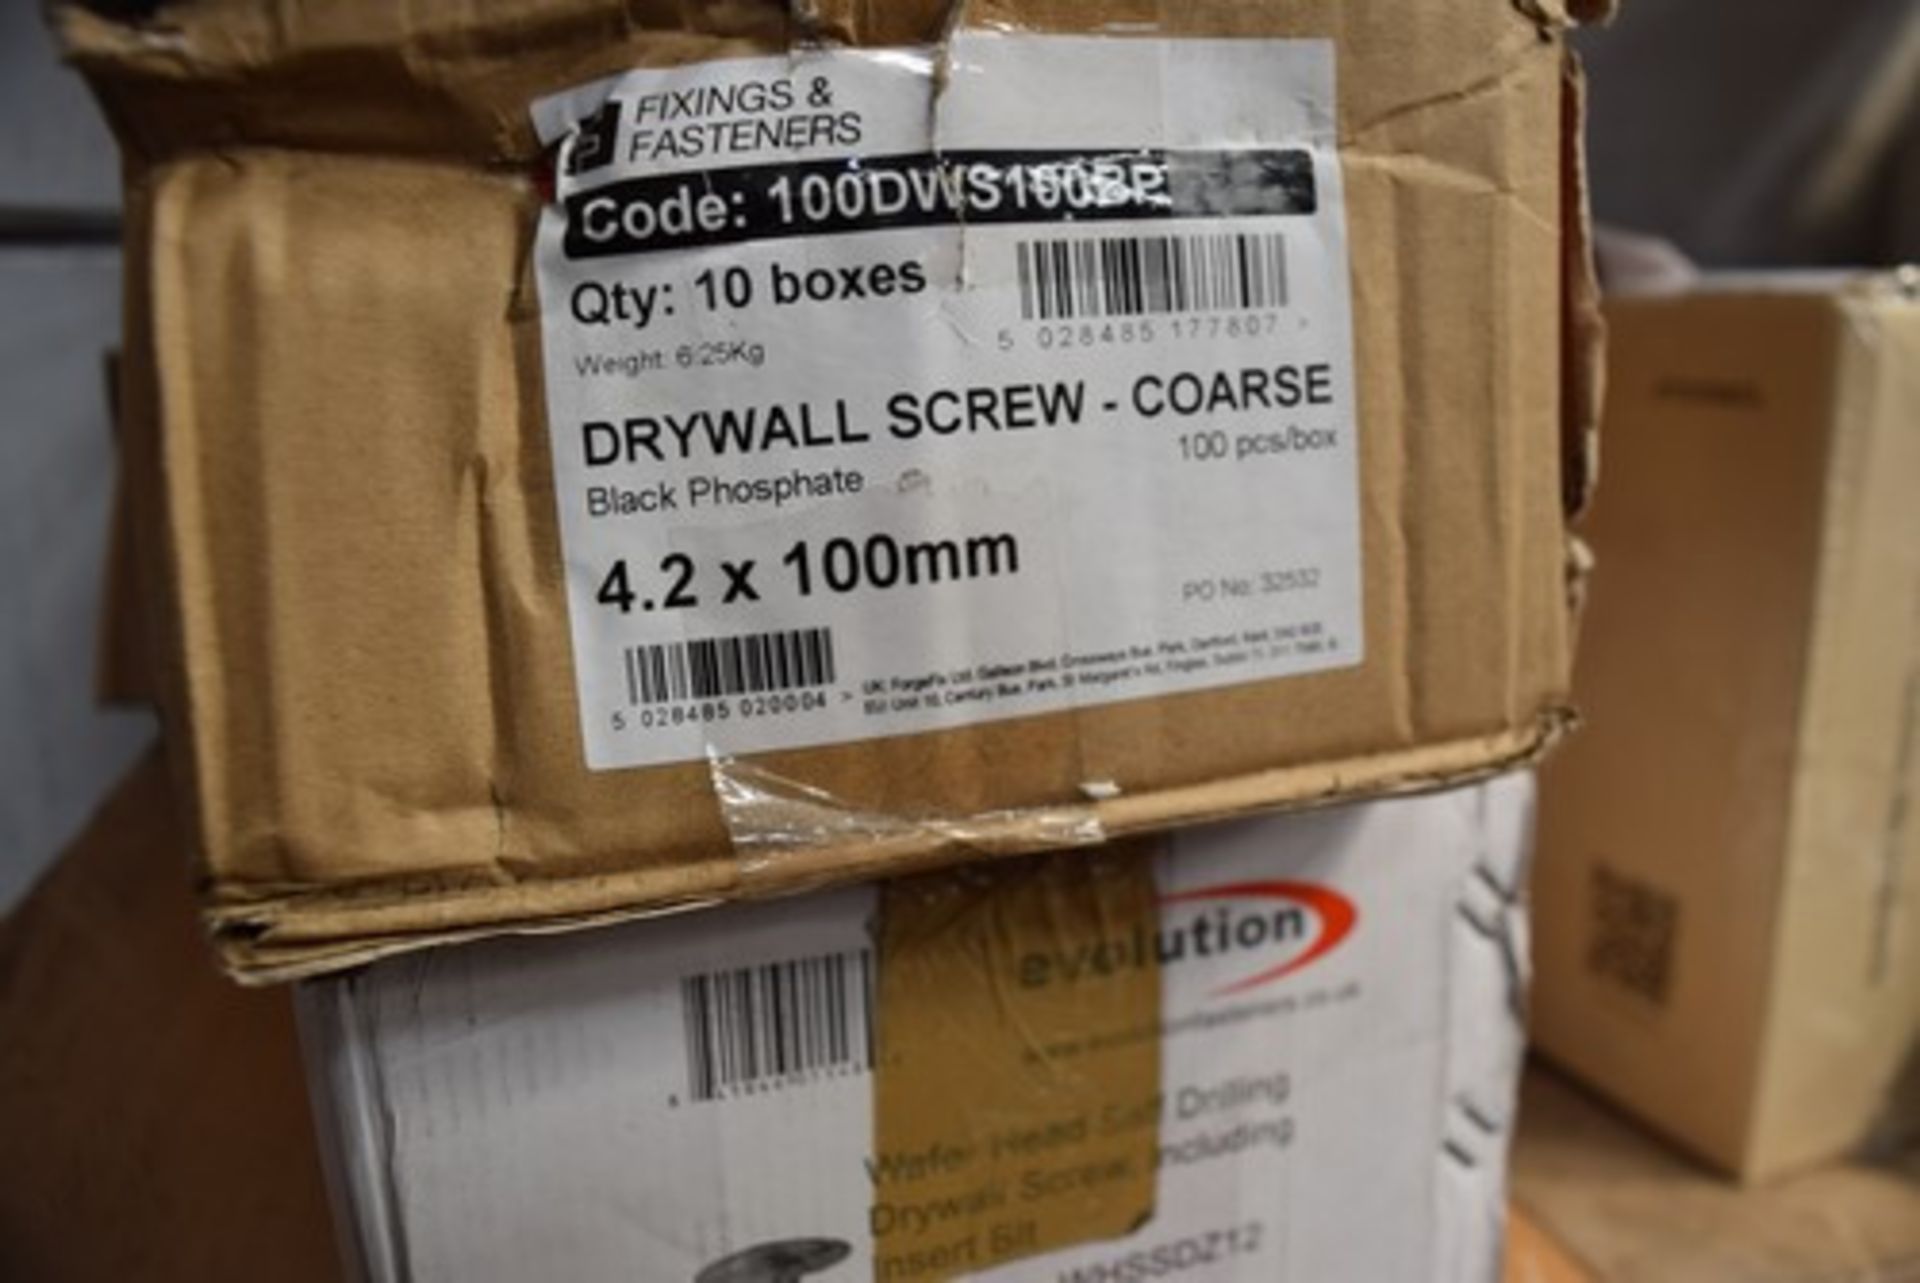 1 x box of Evolution wafer head self drilling drew wall screws, size 4.2 x 12mm, approximately 10, - Image 3 of 4